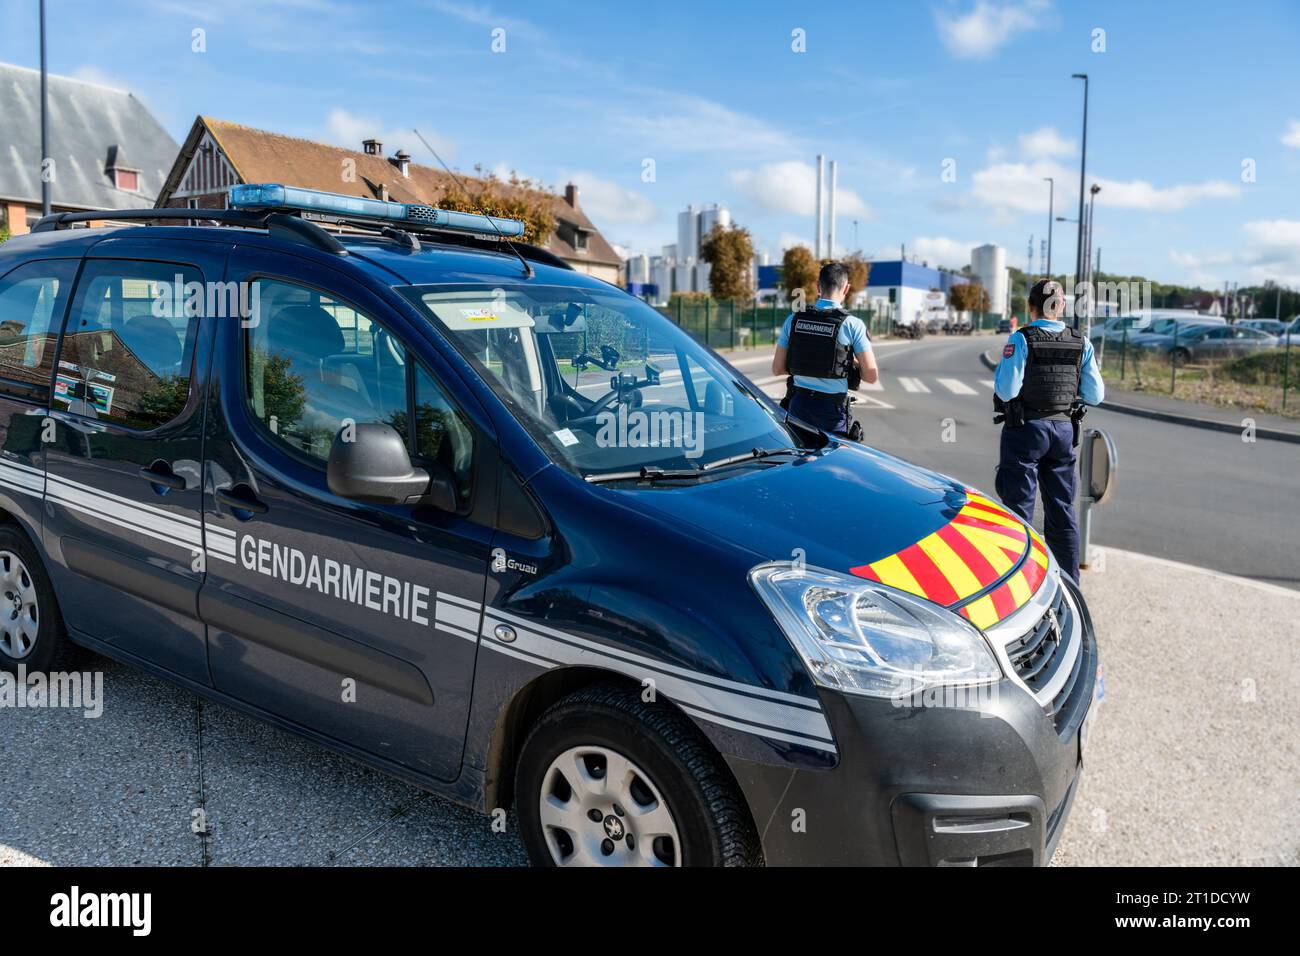 Police officers (“gendarmes”) carrying out a roadside check at a traffic circle Stock Photo